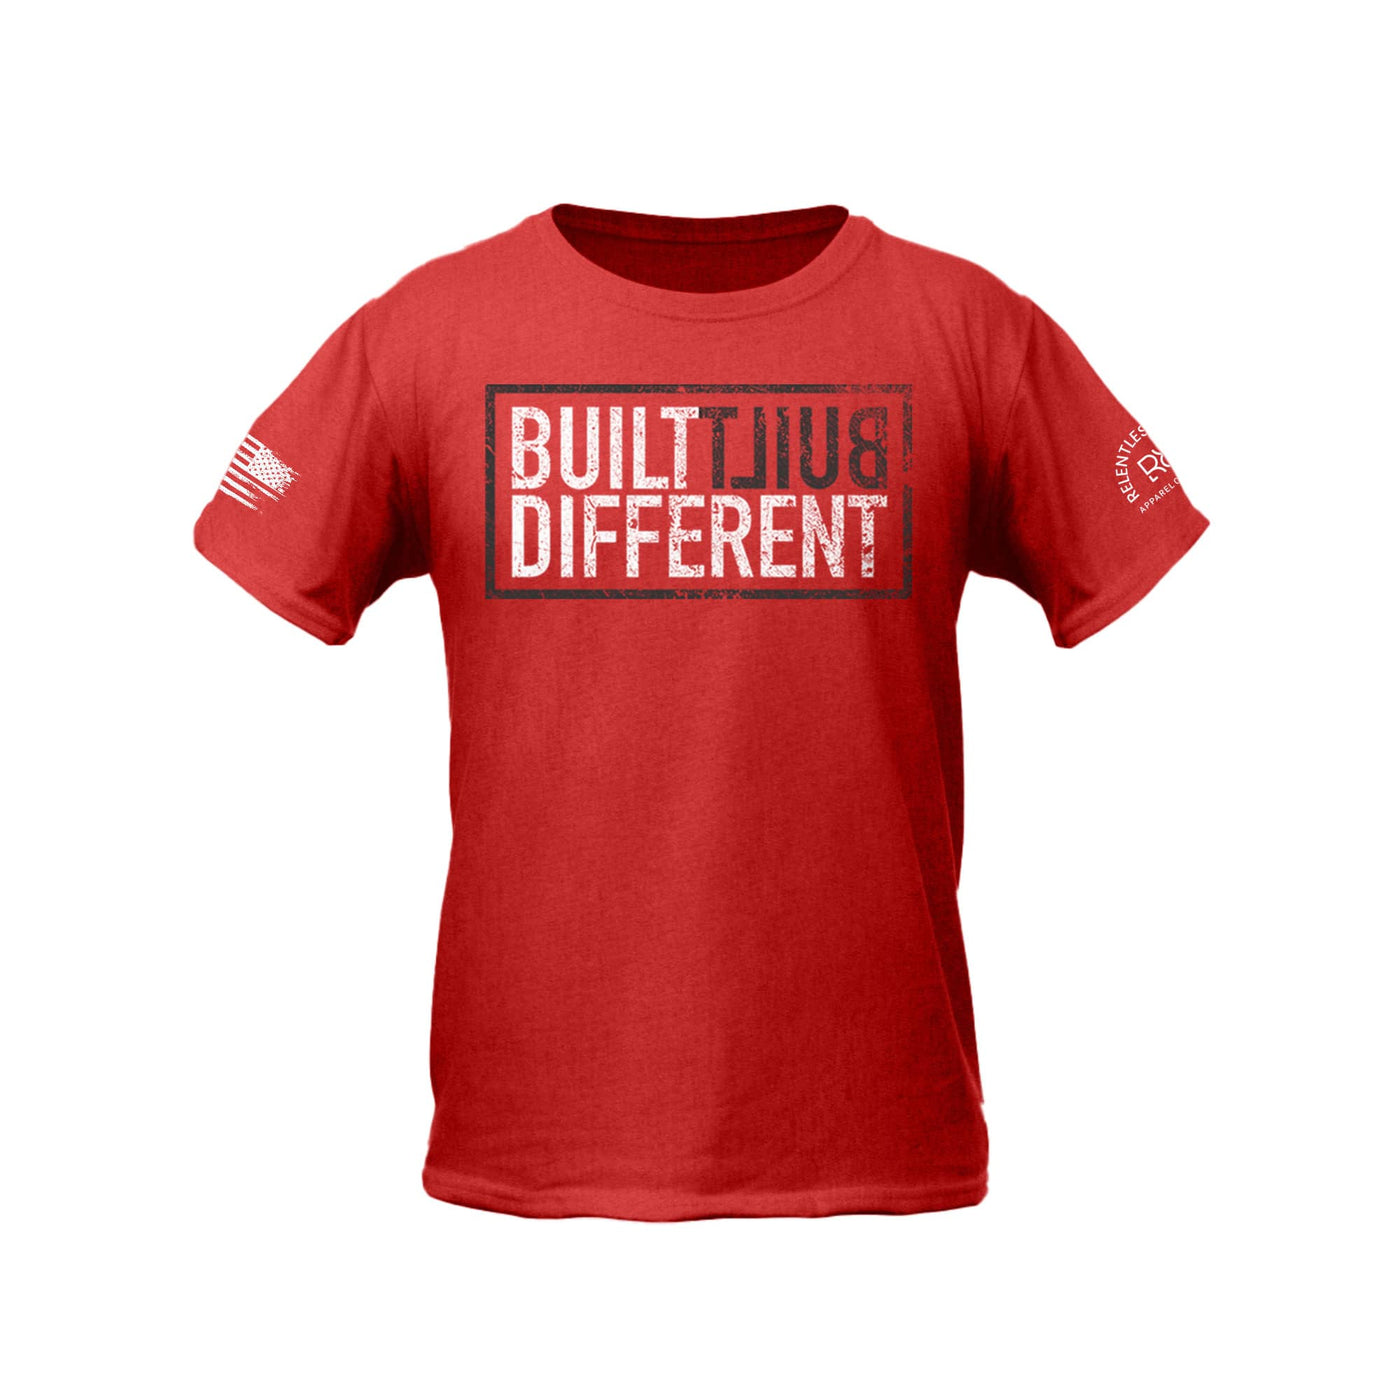 Built Different Youth front design heather red tee